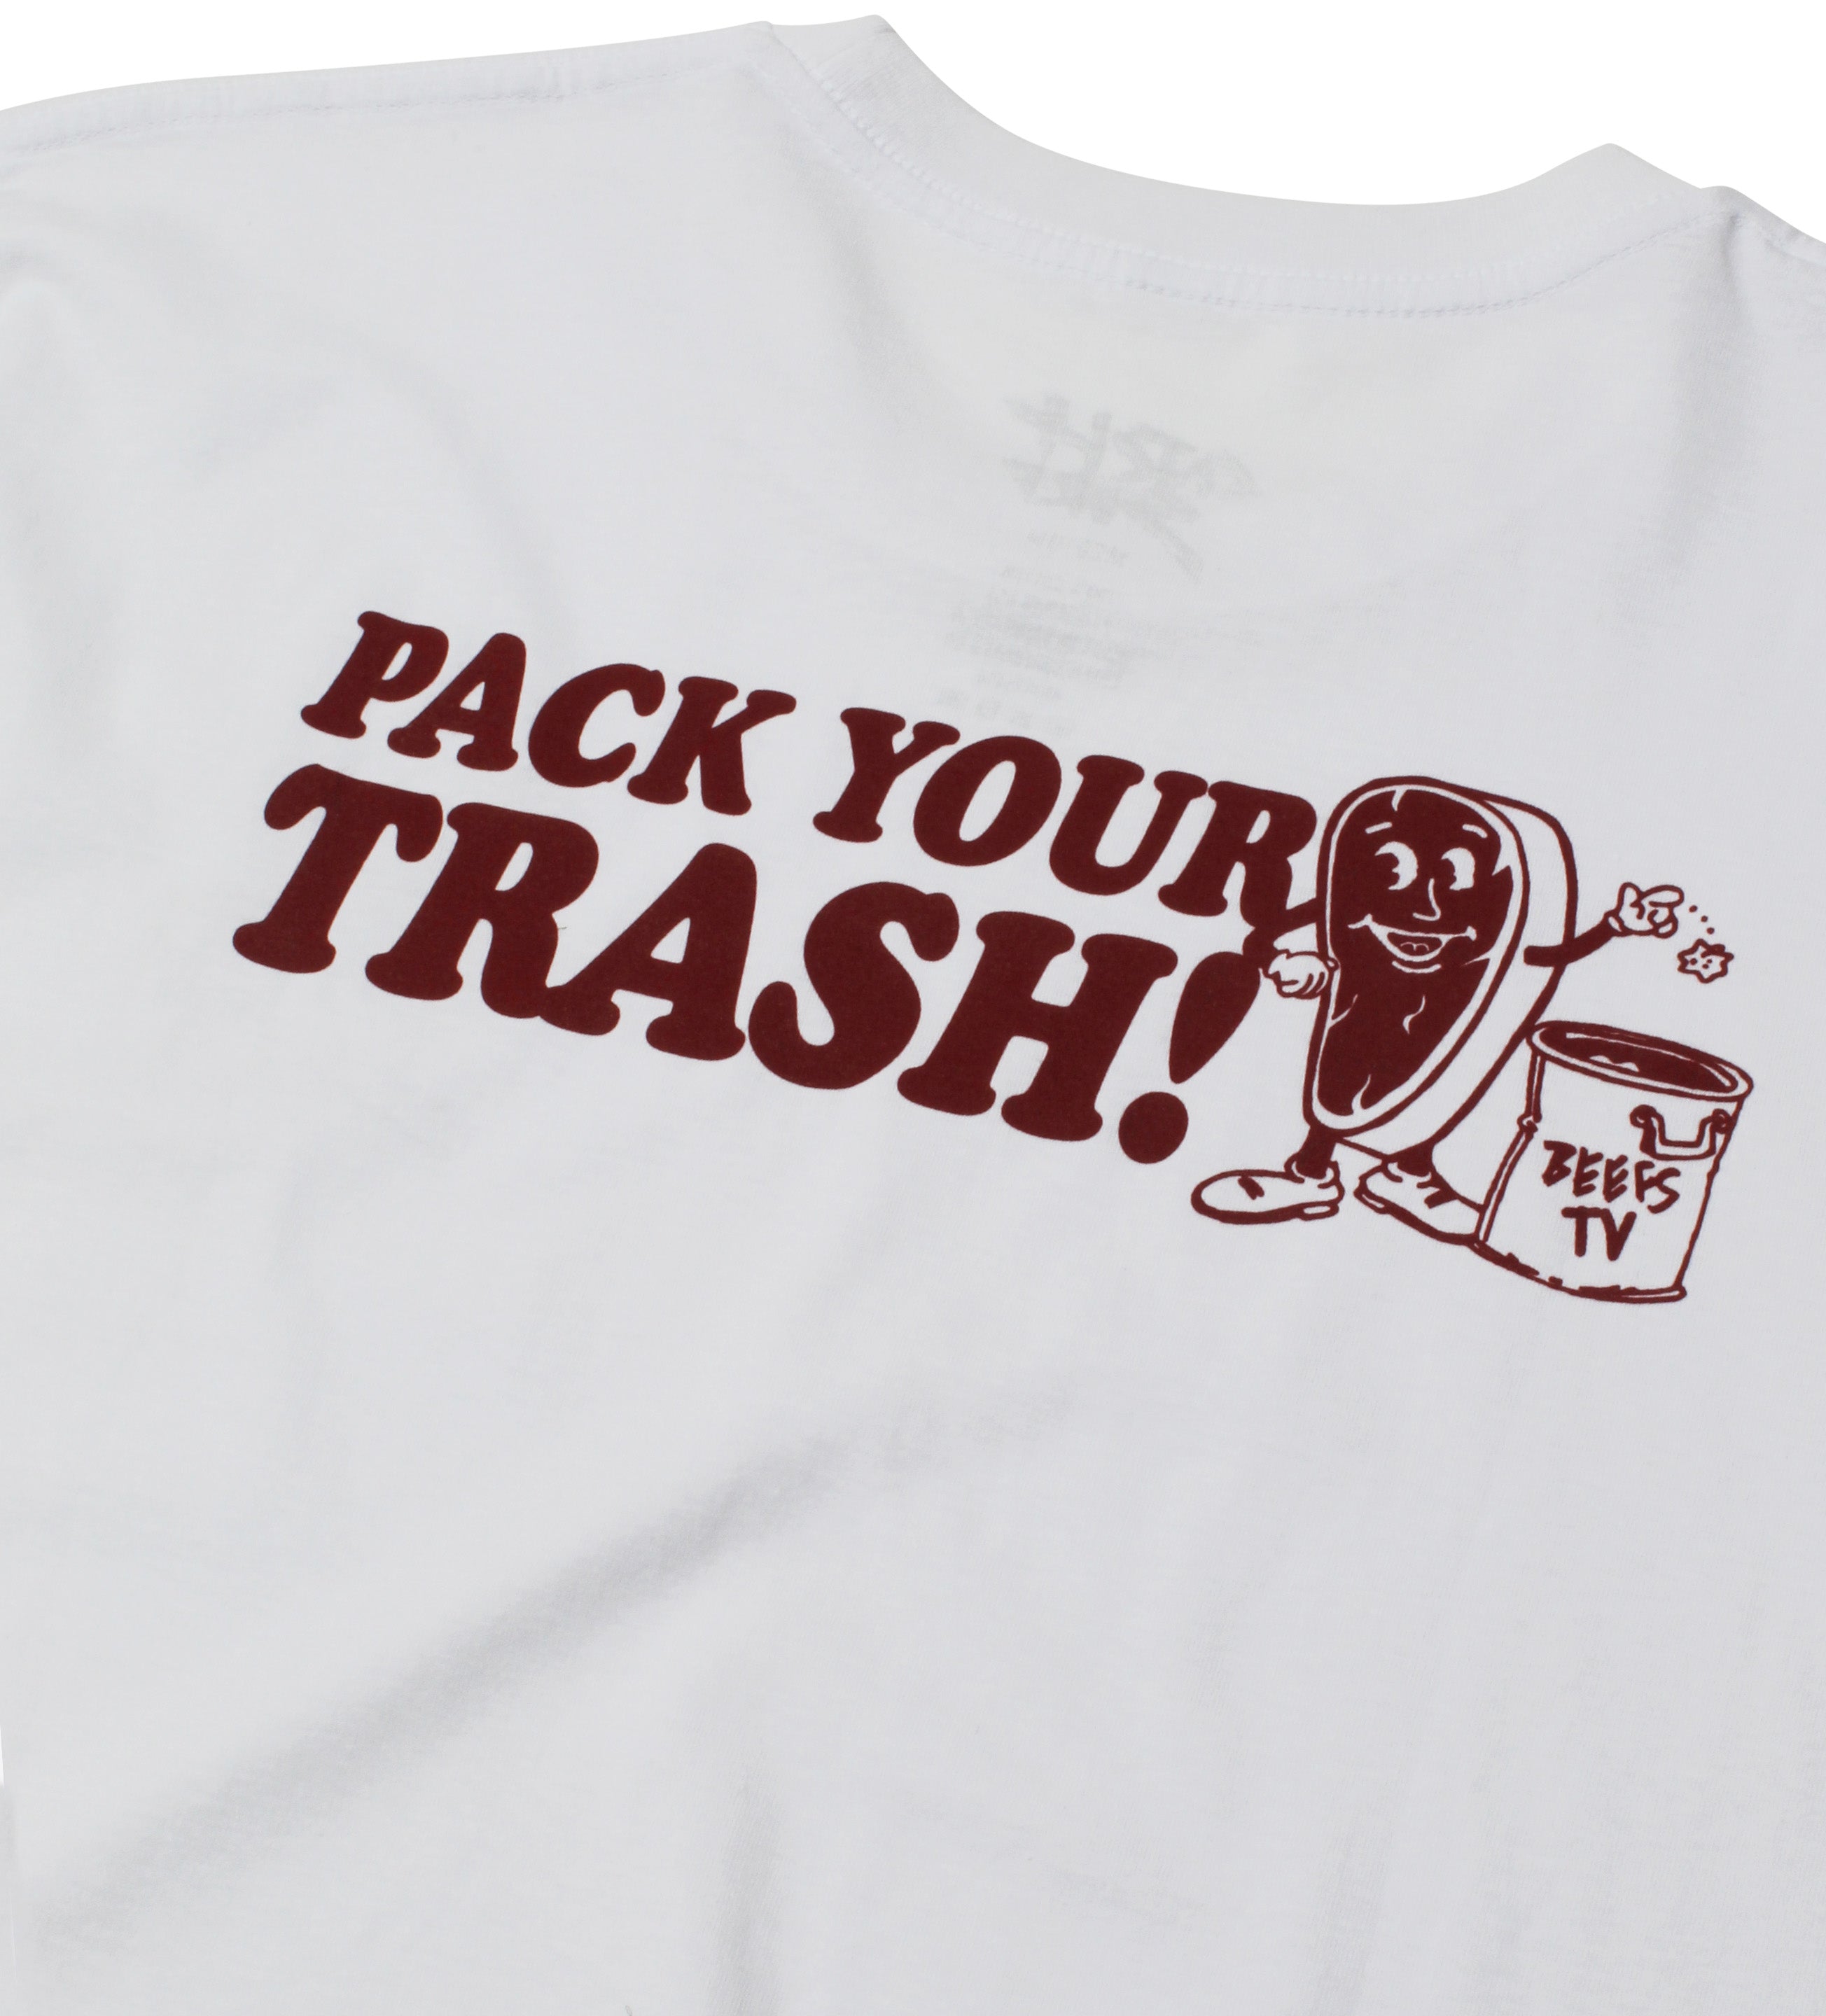 Pack Your Trash S/S Tee